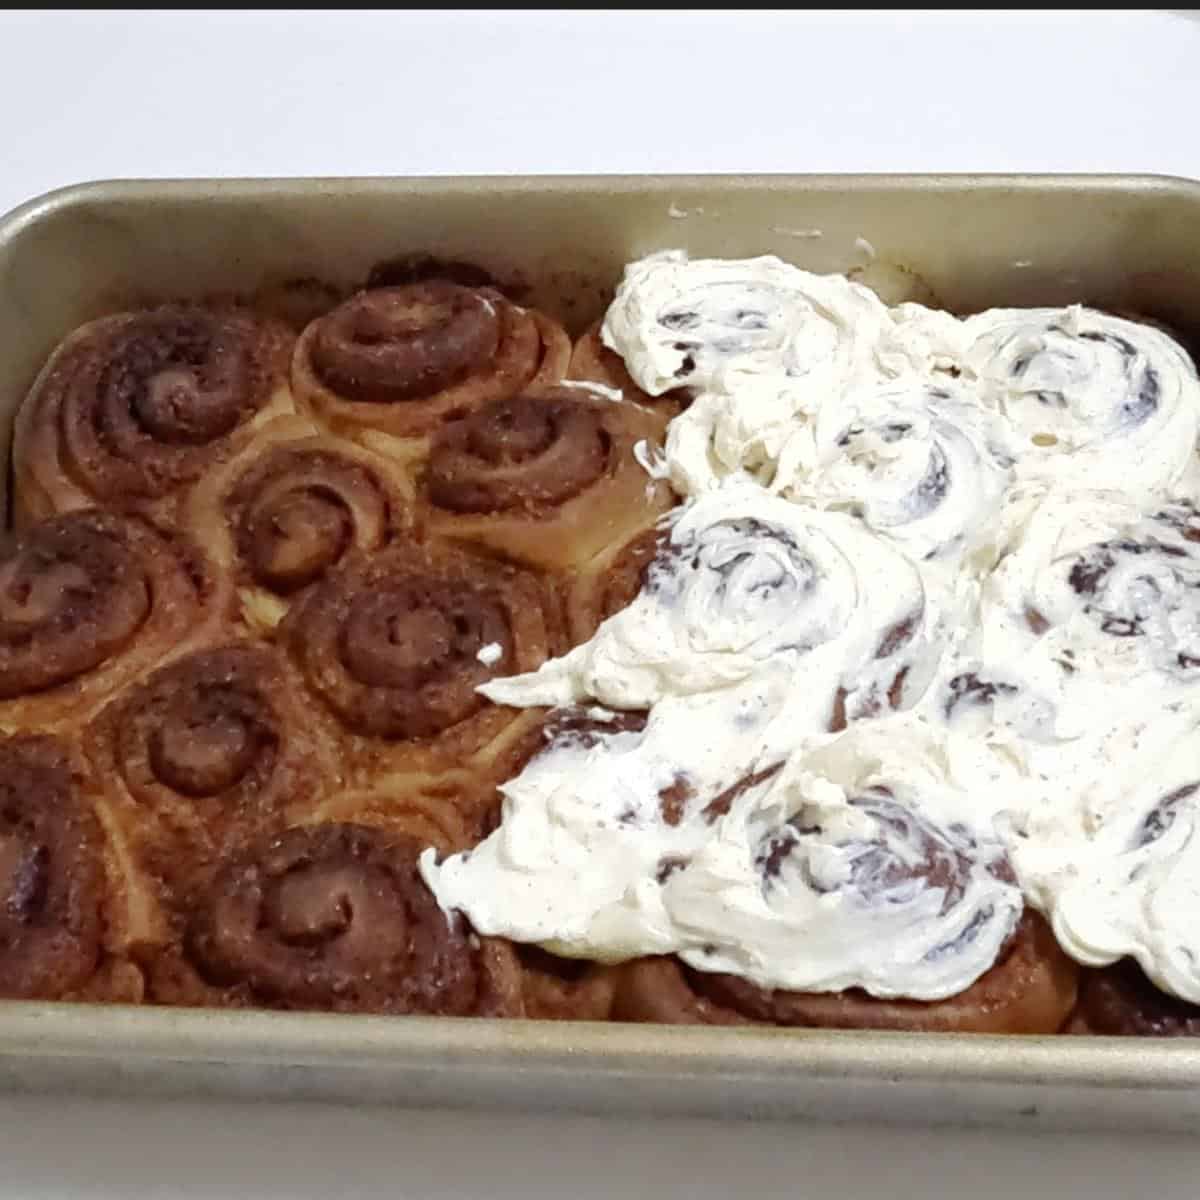 A rectangle pan with cinnamon rolls.